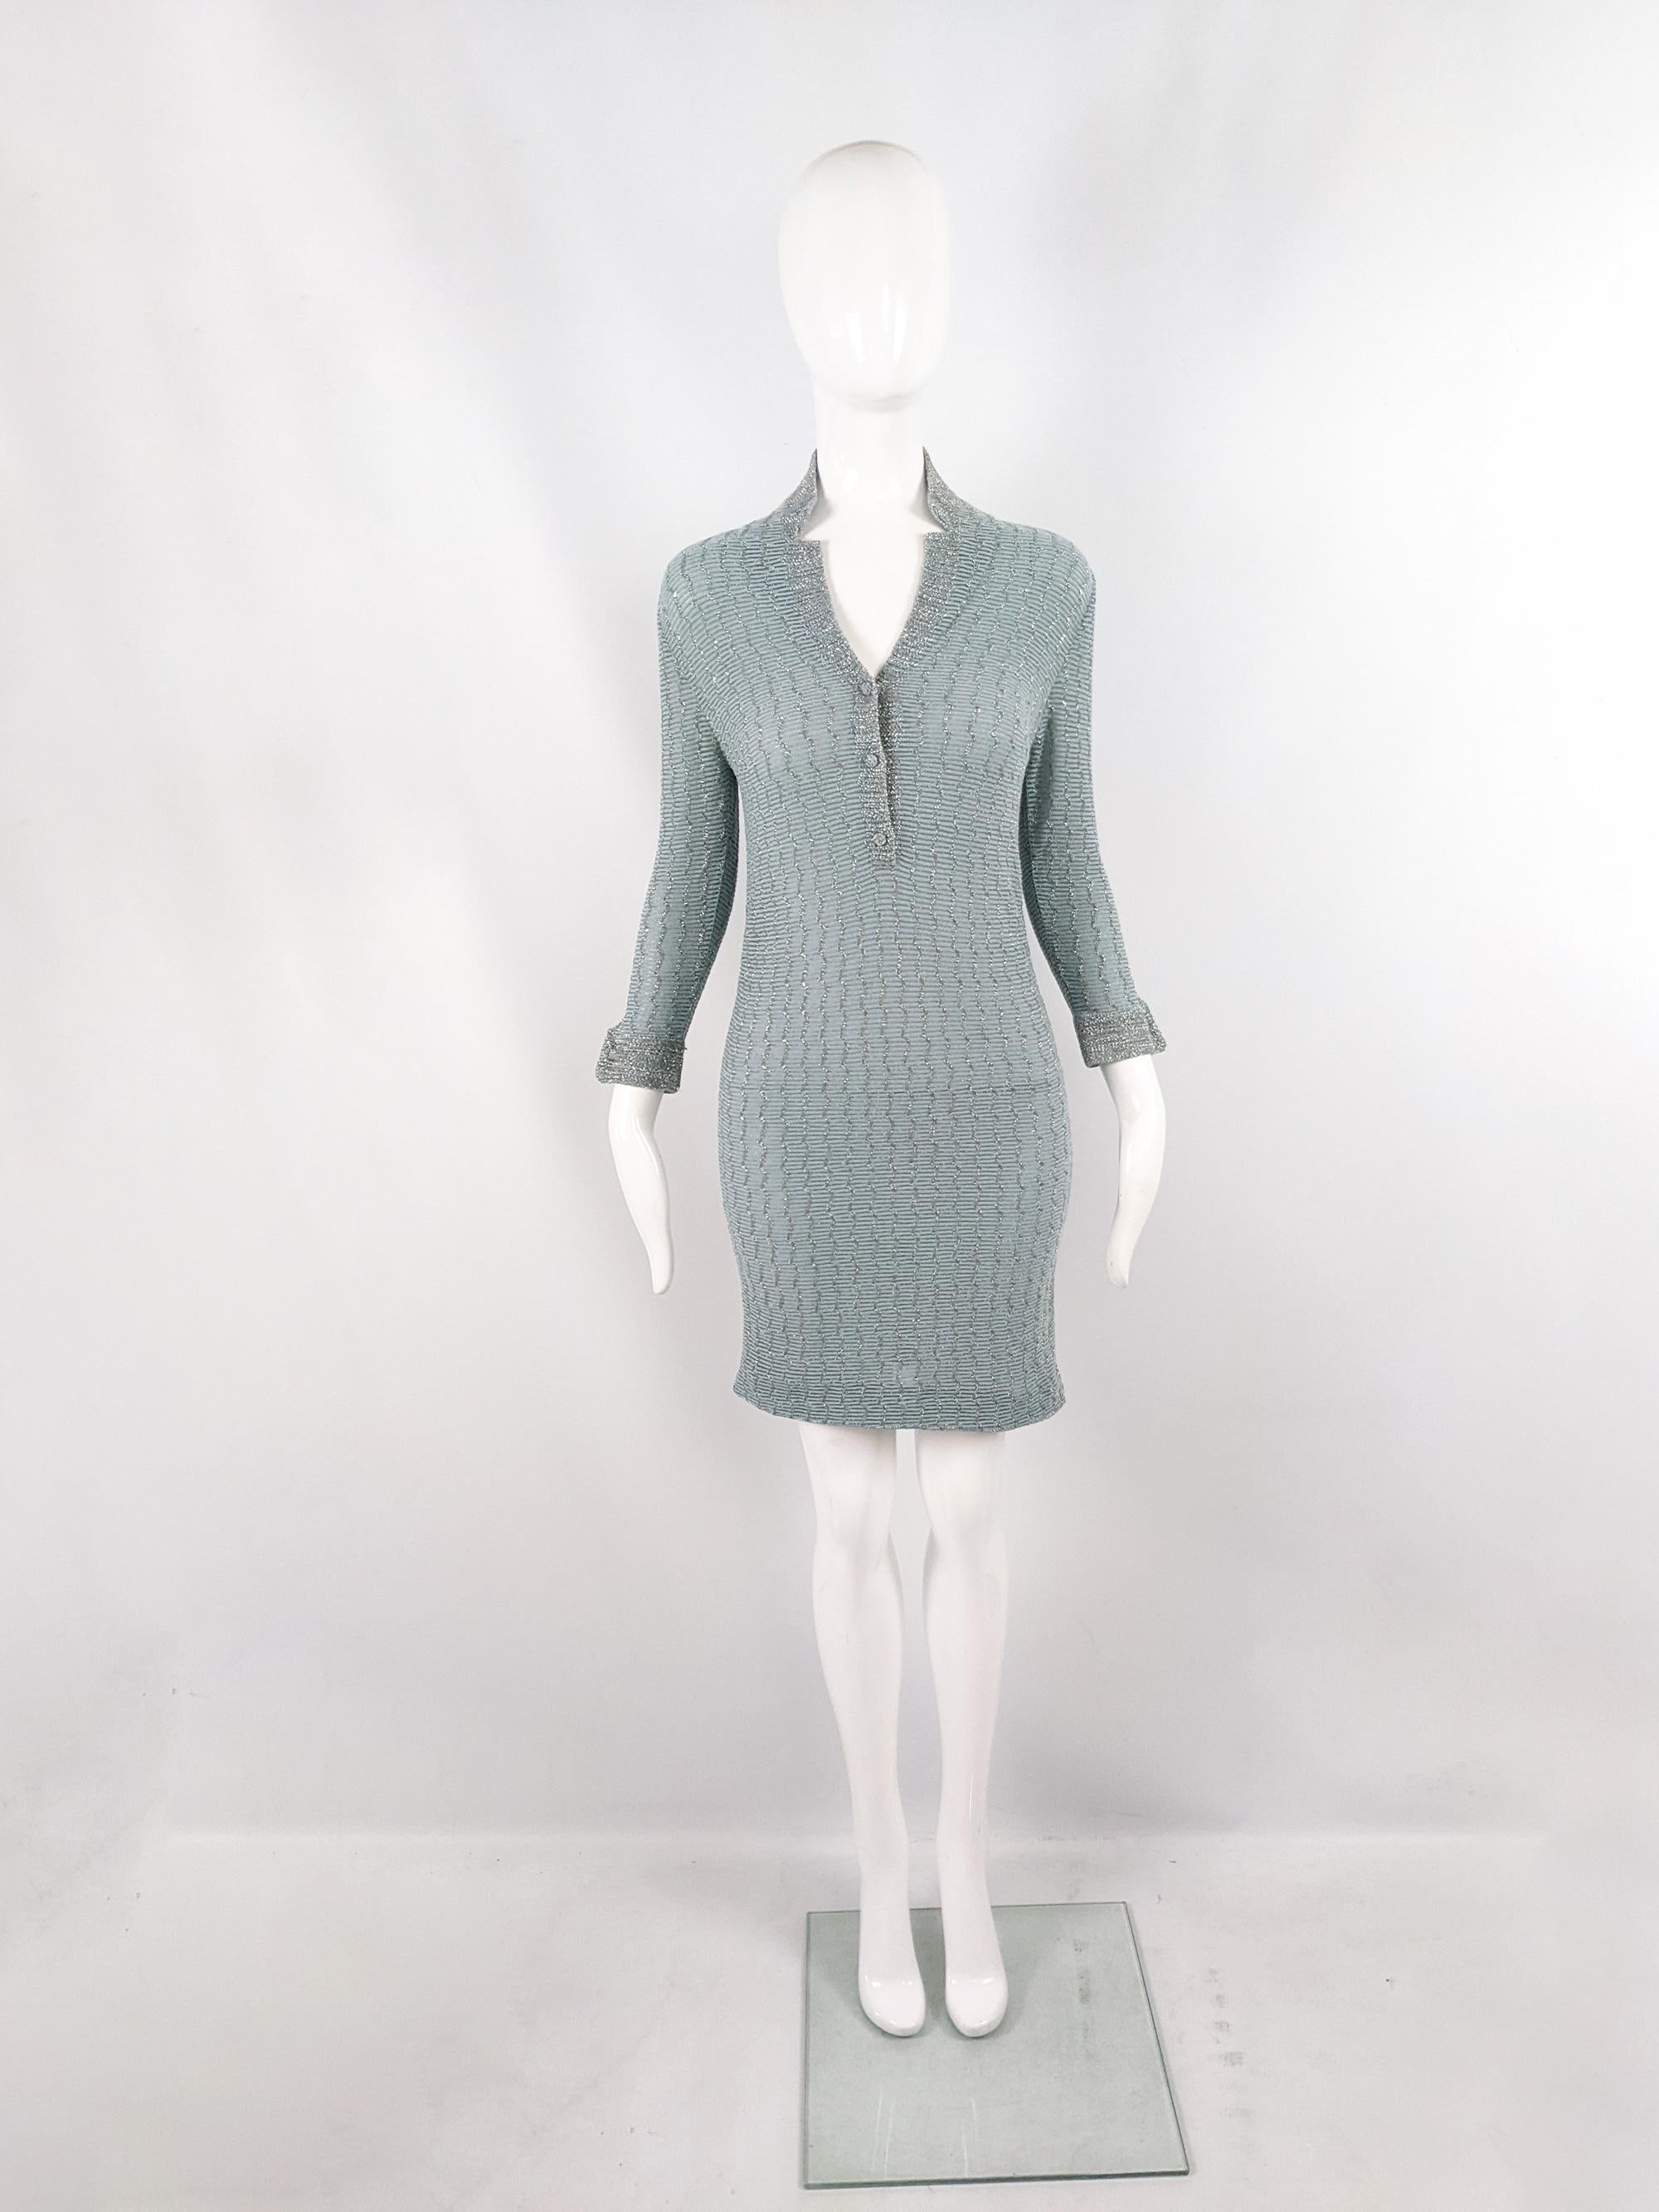 A fabulous and rare vintage womens mini dress from the 60s by luxury Italian fashion designer, Luisa Spagnoli. In a duck egg / pastel blue knit fabric with a silver lurex metallic thread running throughout adding a luxurious touch. It has bracelet